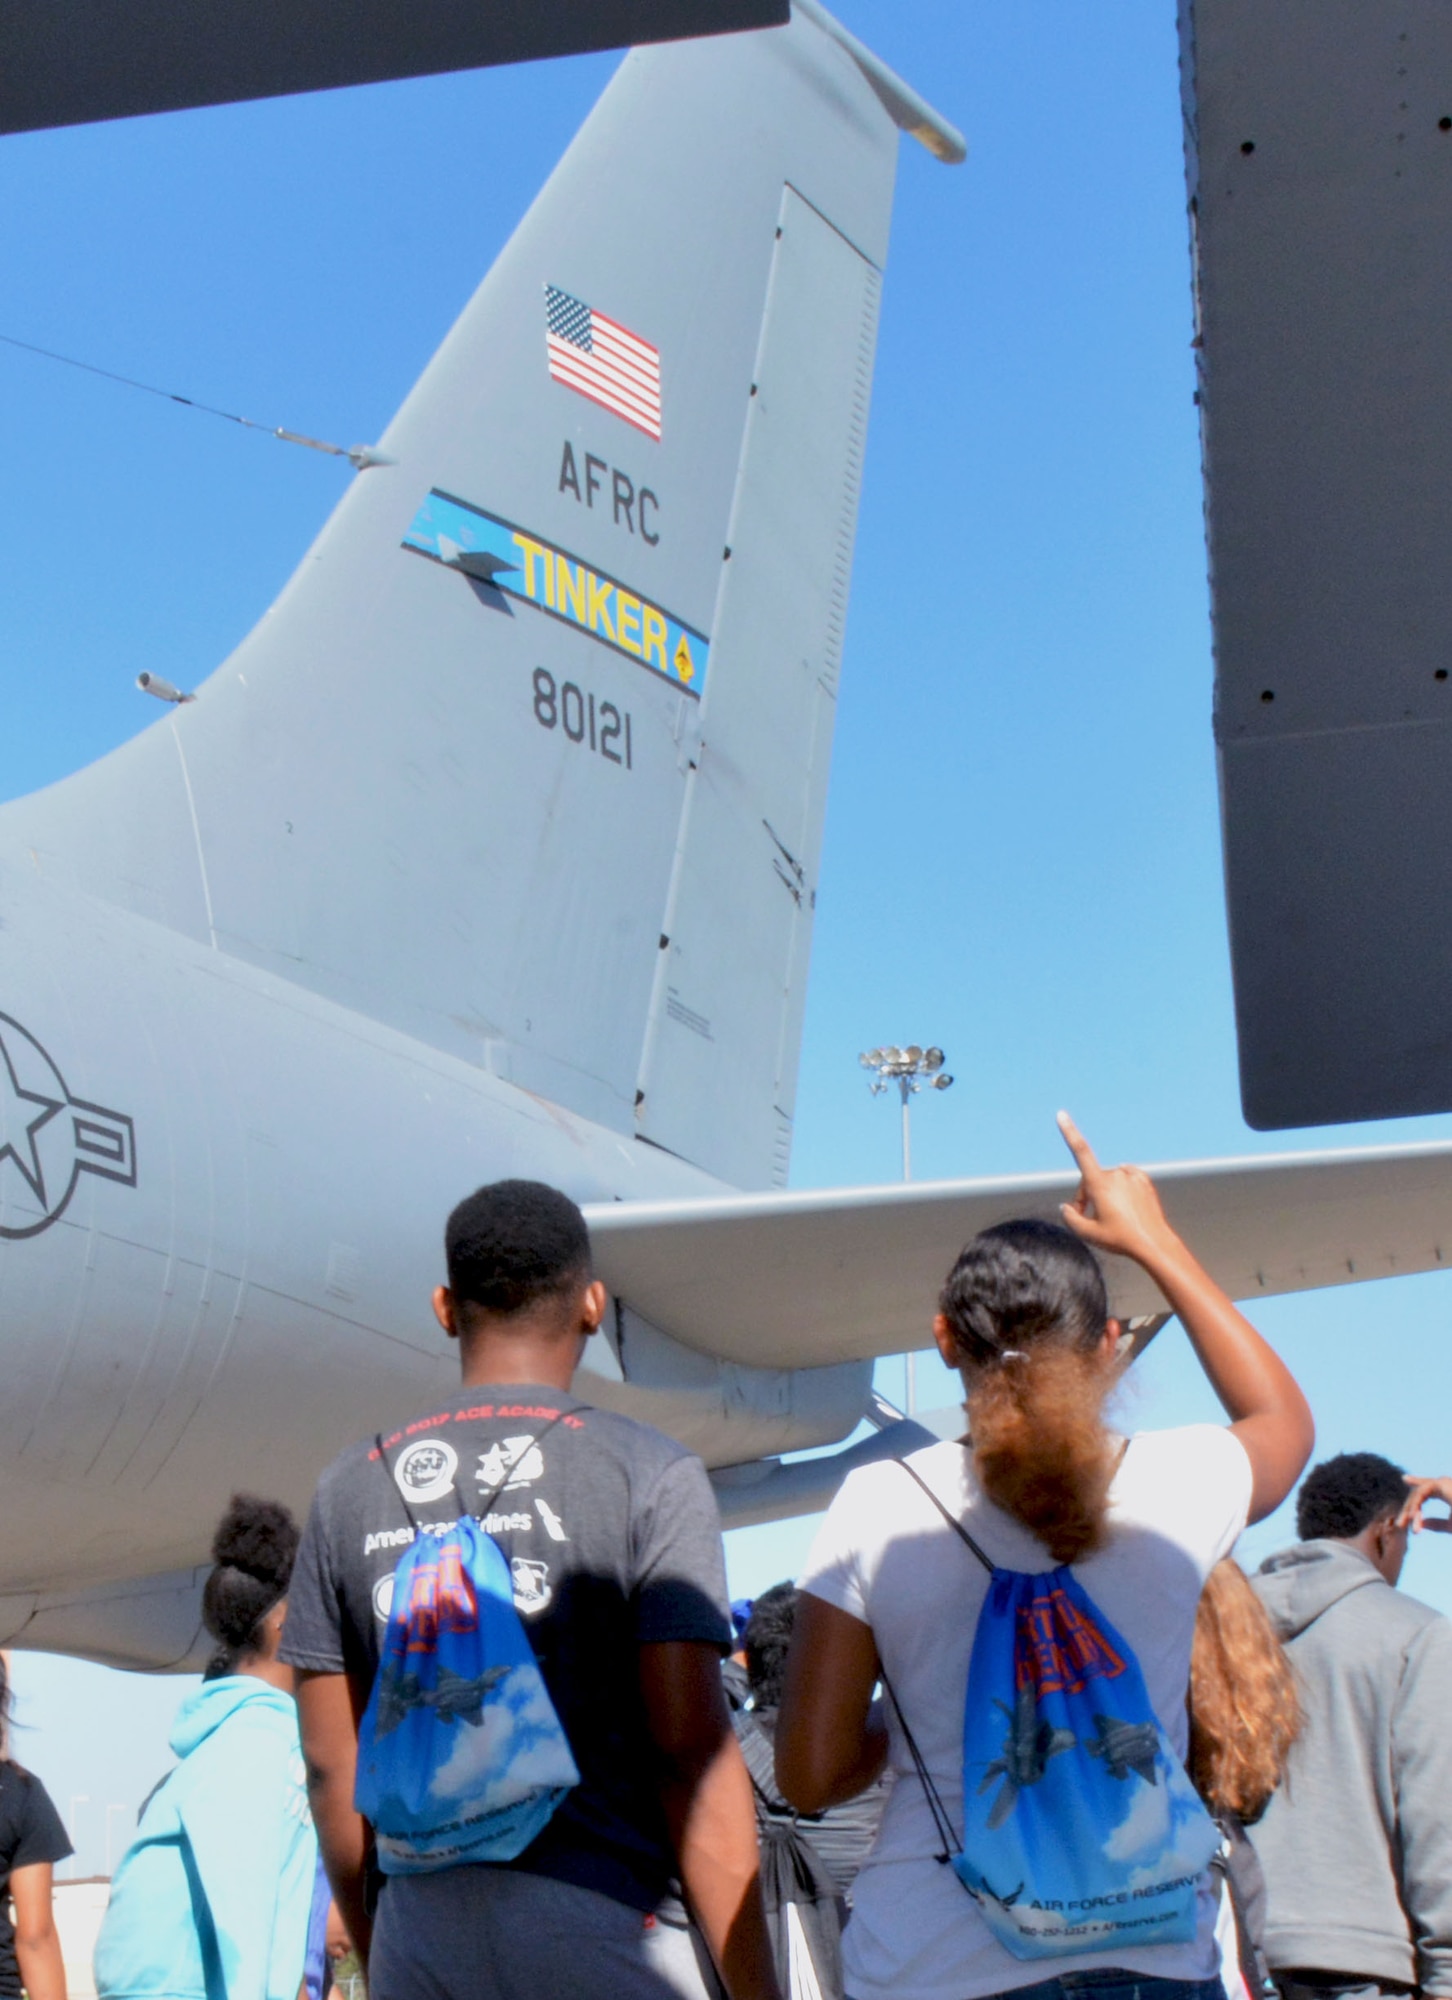 Future aviators from the Organization of Black Aerospace Professionals receive an in-depth look at a 507th Air Refueling Wing KC-135 Stratotanker here June 20, 2017. The young aviators observed how the Air Force Reserve directly fuels the fight through preparation, training and striving for combat-readiness during their three hour long orientation flight. (U.S. Air Force photo/Staff Sgt. Samantha Mathison)